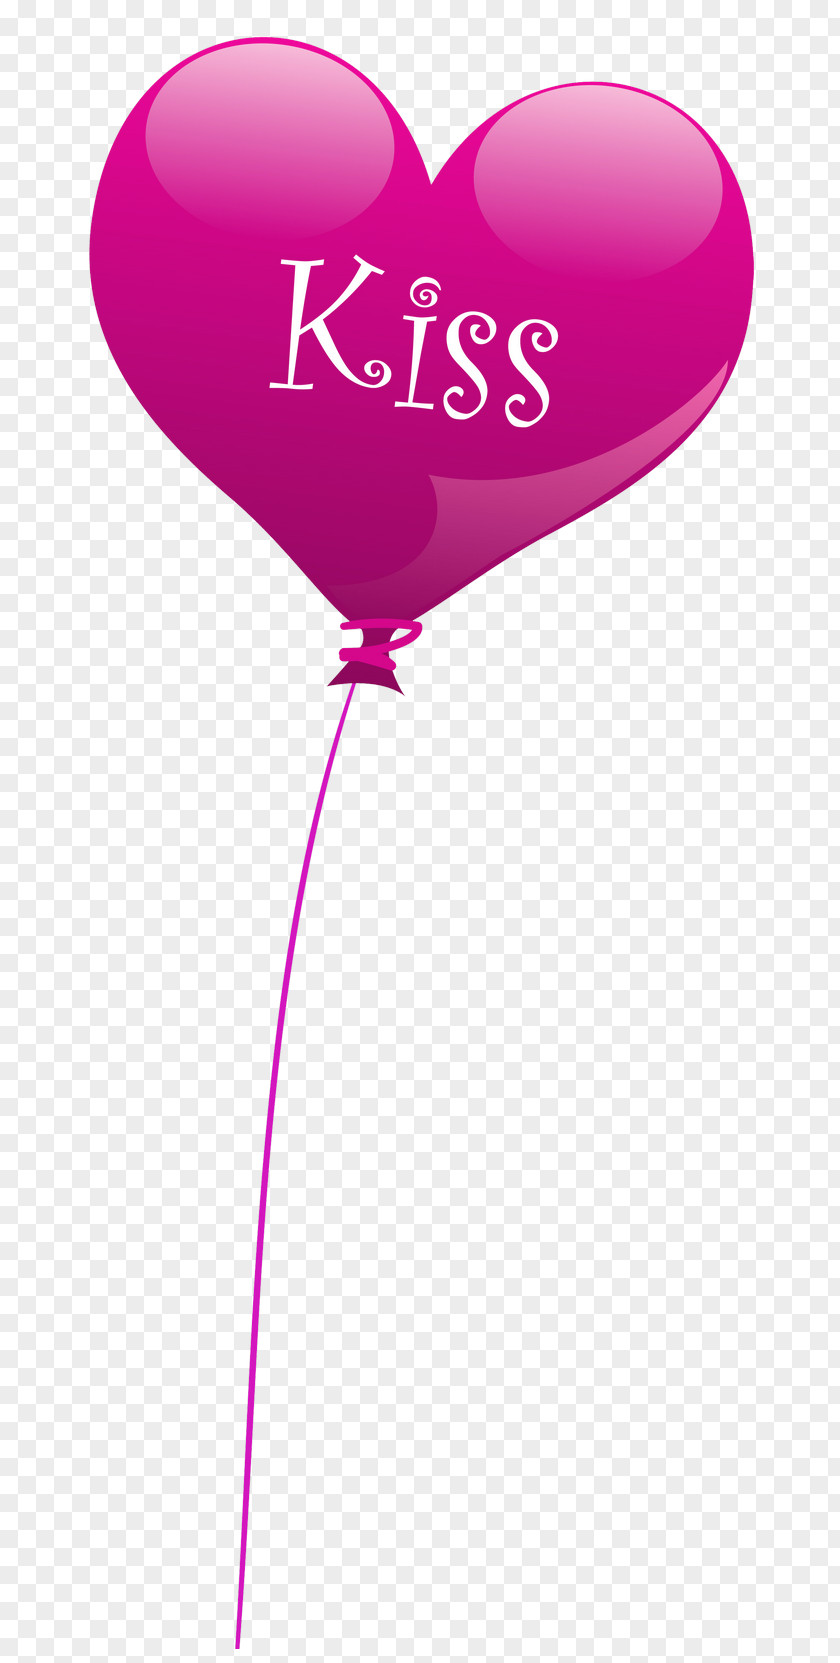 Transparent Heart Kiss Balloon PNG Clipart Valentine's Day Clip Art PNG